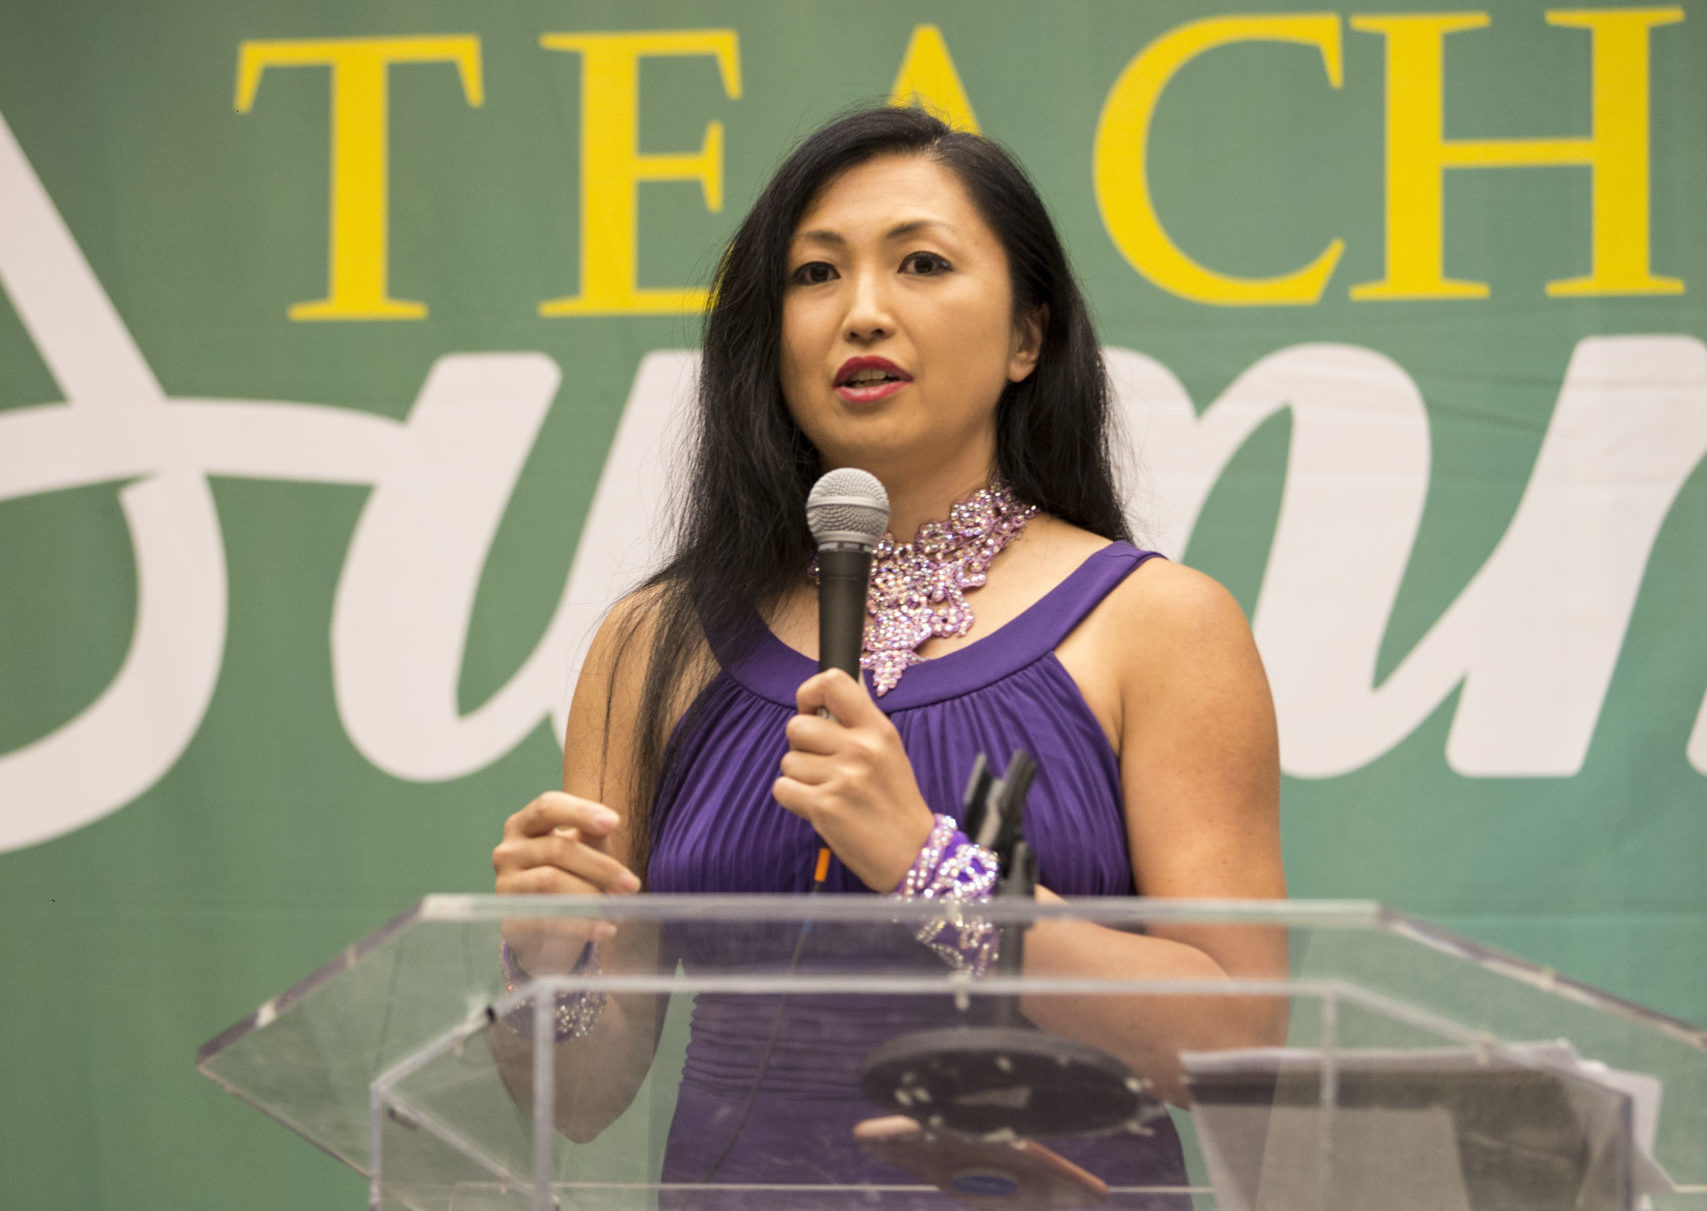 marisa hamamoto speaks into a microphone at a clear podium that reads "Dance Teacher Summit"